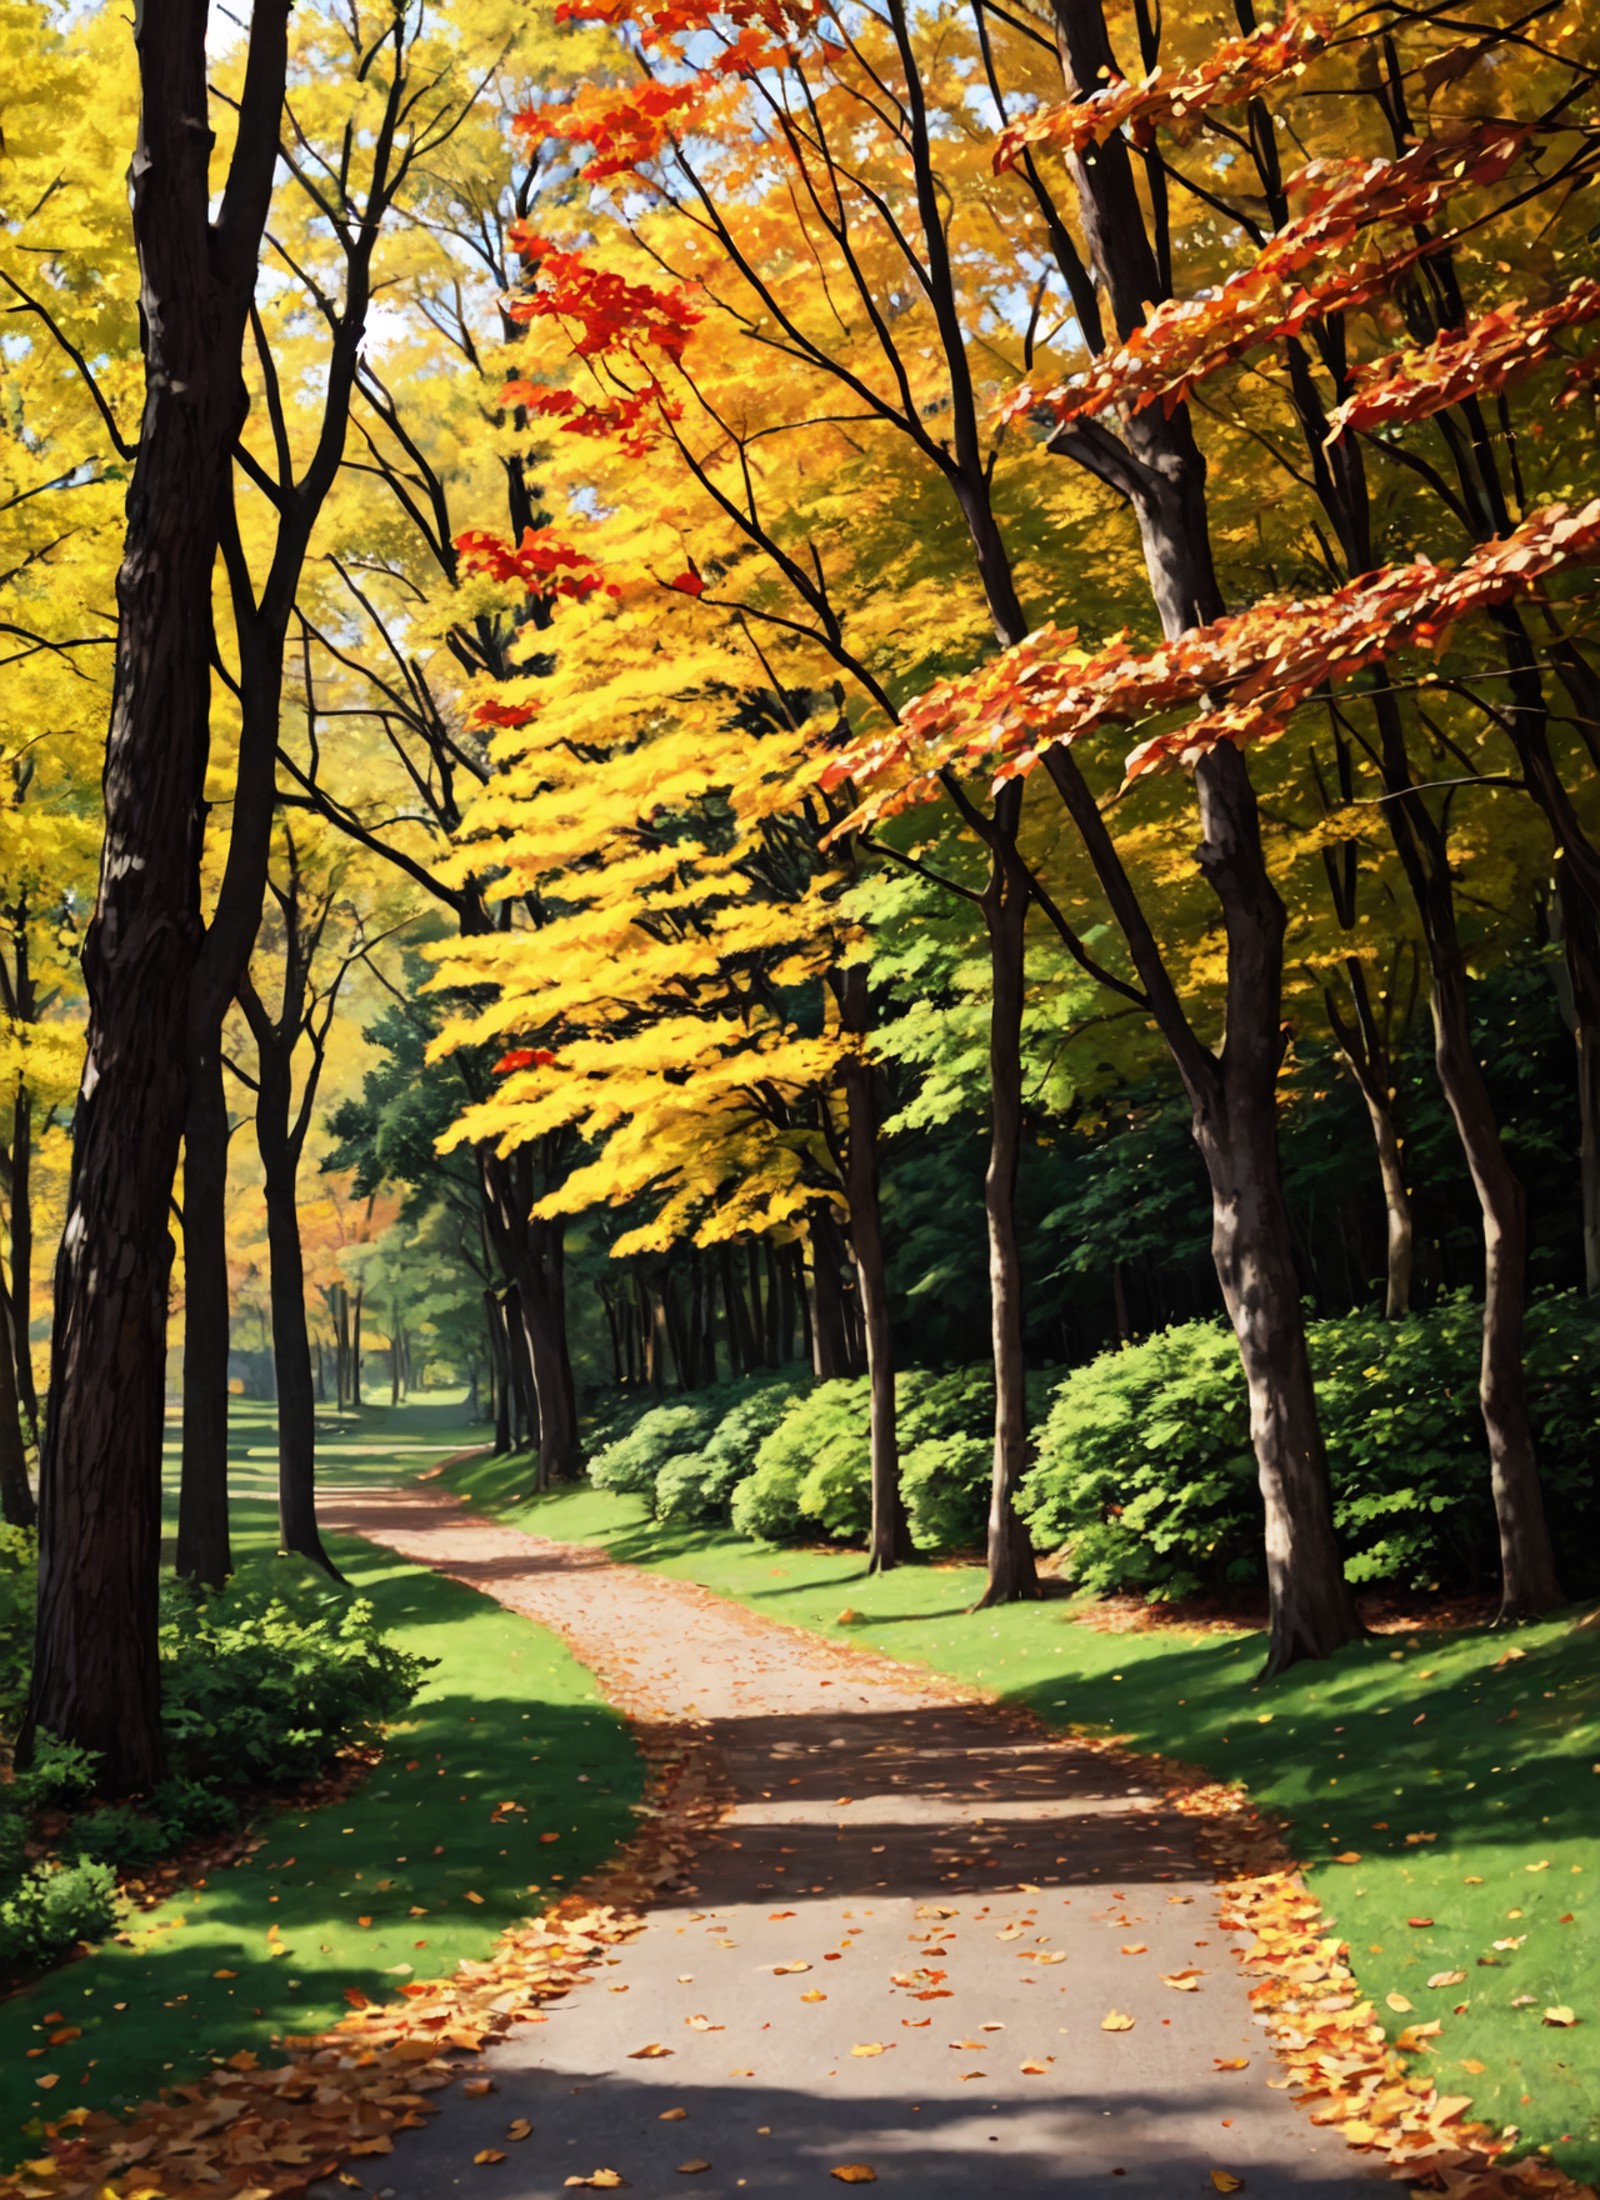 fall trees, cool atmosphere, leaves on the ground, BREAK, foliage: vibrant hues of red, orange, and yellow, adorning the b...